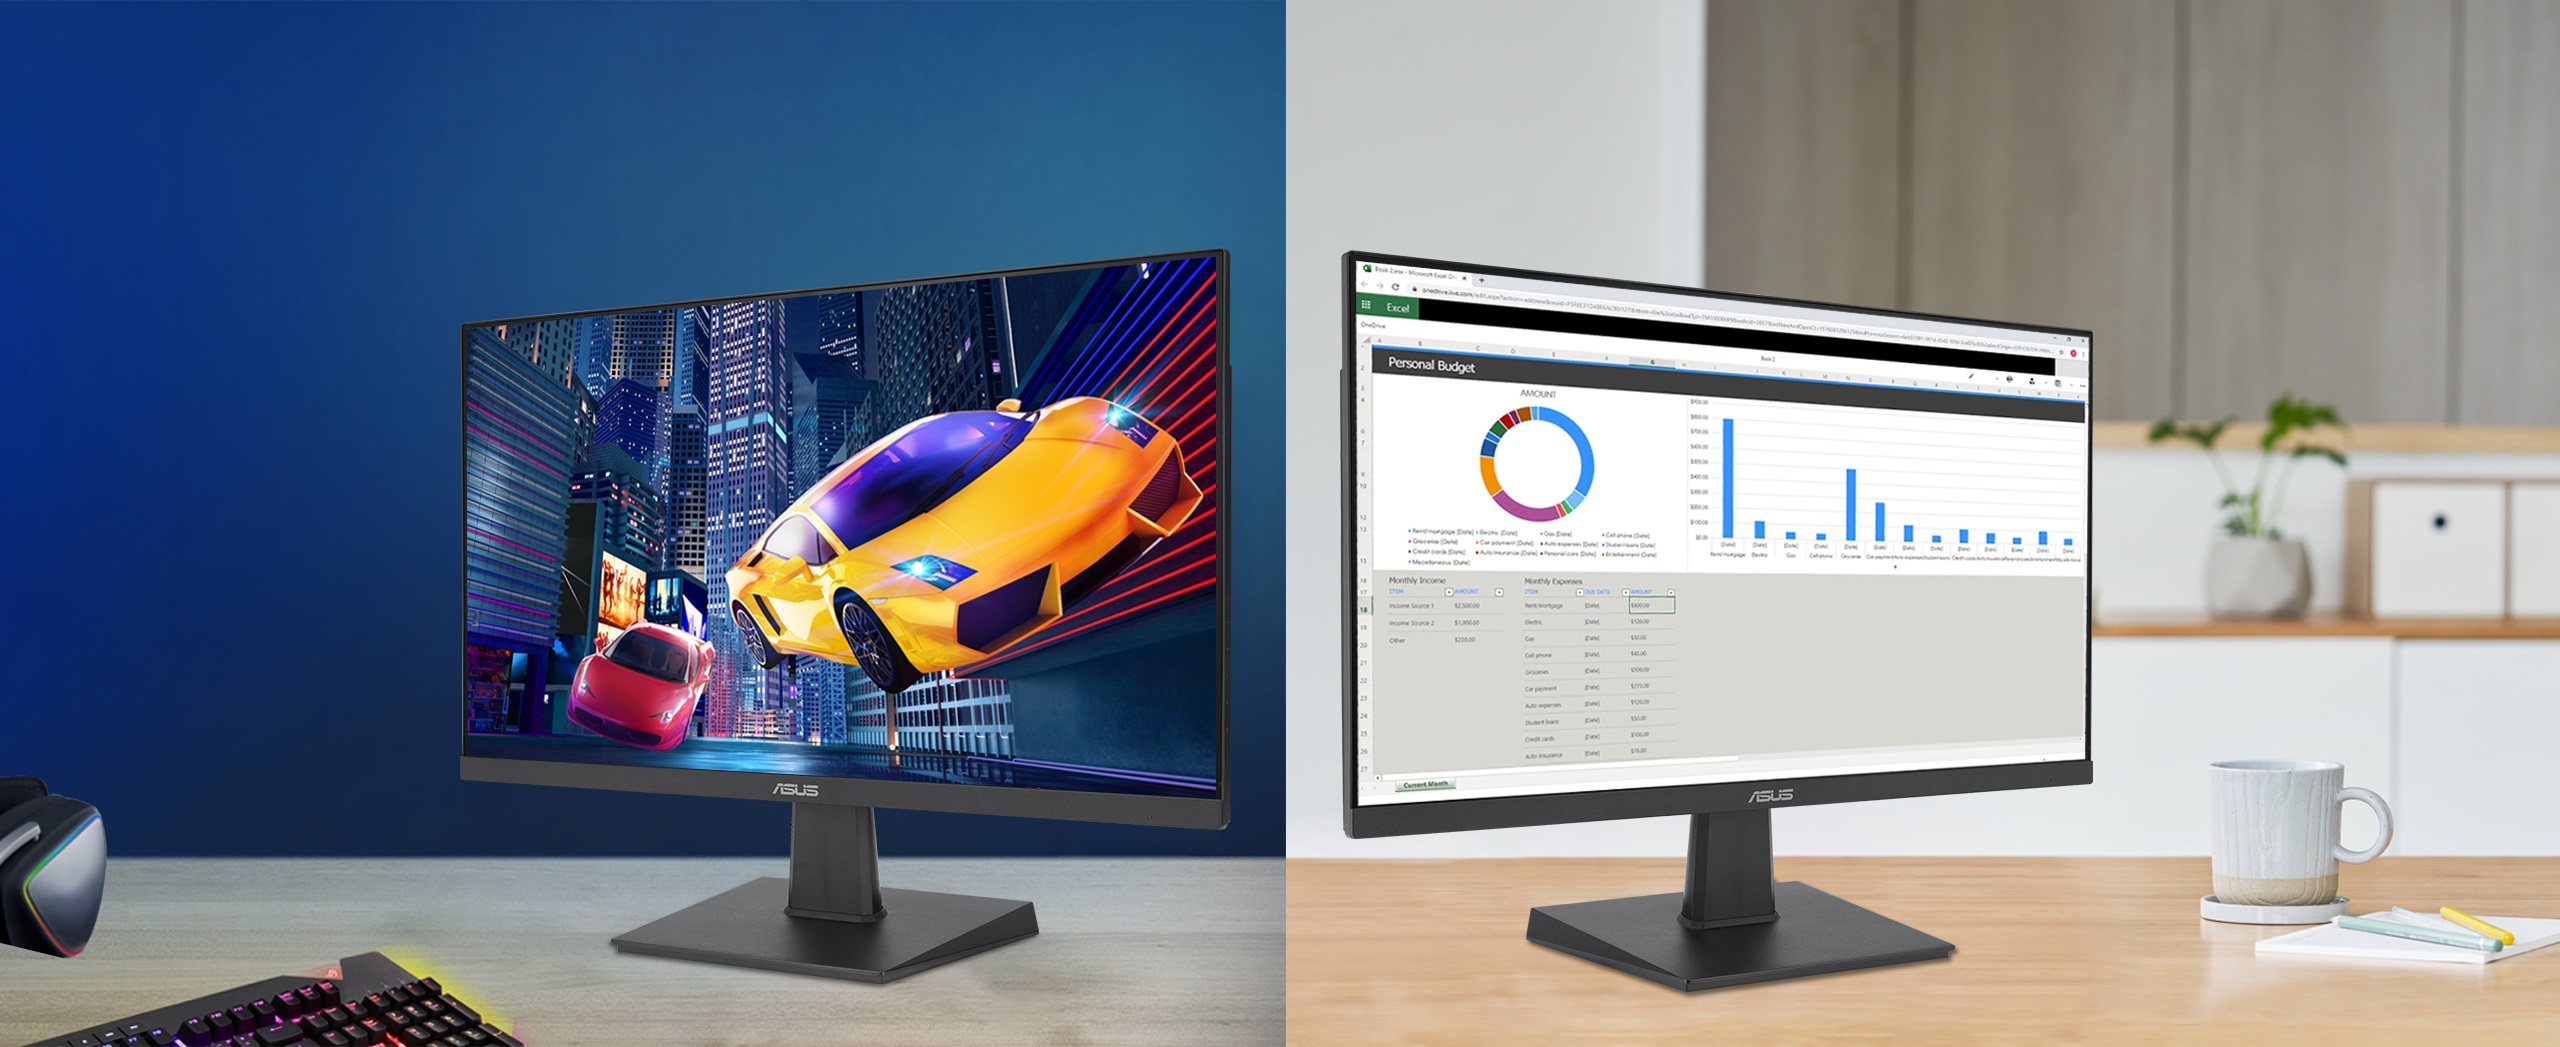 ASUS VA24EHF is 23.8-inch IPS Eye Care Gaming monitor with fast 100Hz refresh rate and Adaptive-Sync technology to eliminate screen tearing and choppy frame rates for the smoother-than-ever experience.